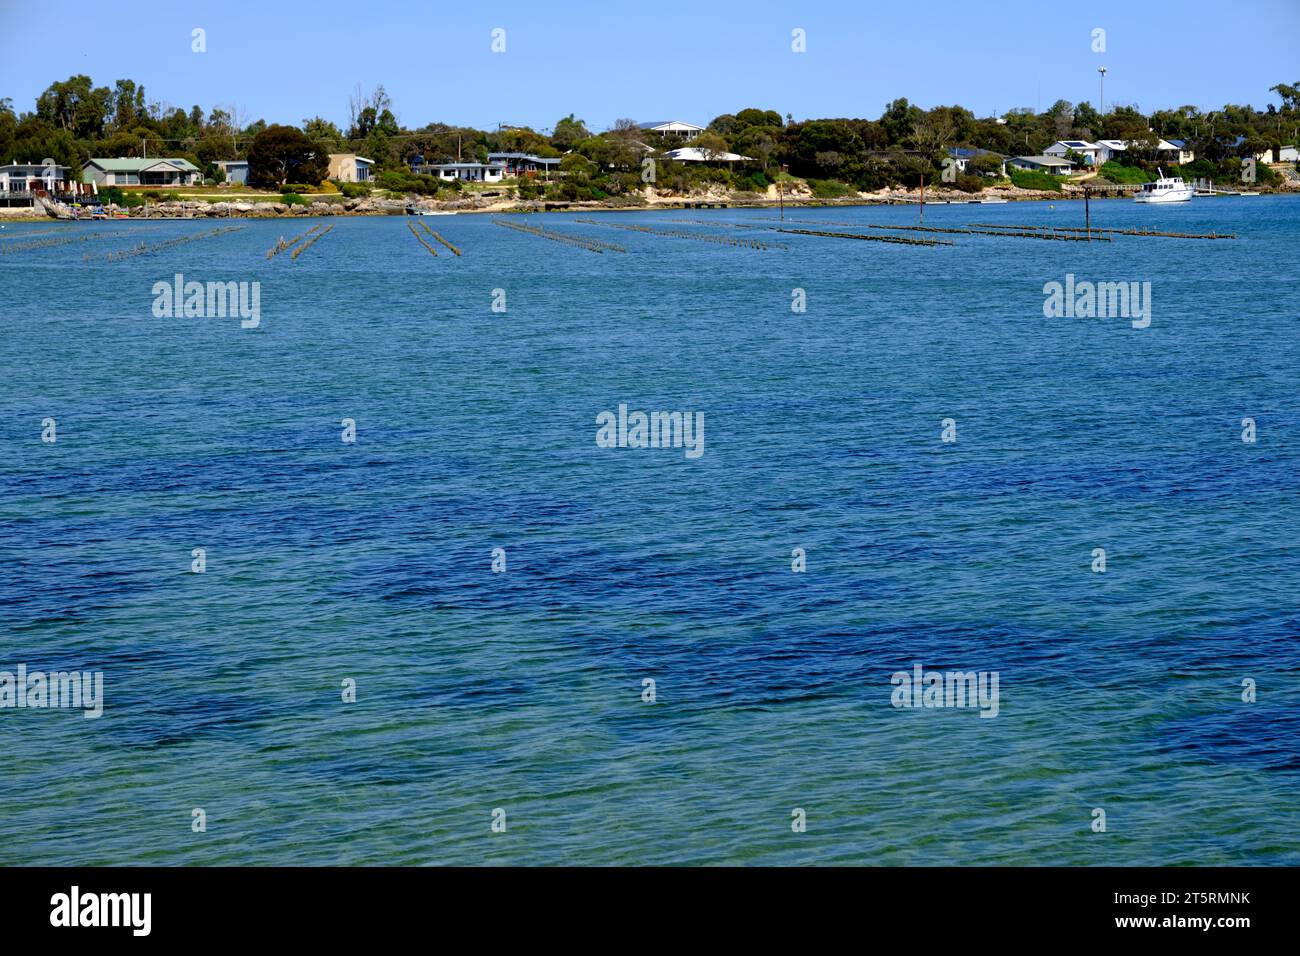 Oyster beds in a bay at Coffin Bay in the Eyre Peninsula region of South Australia Stock Photo